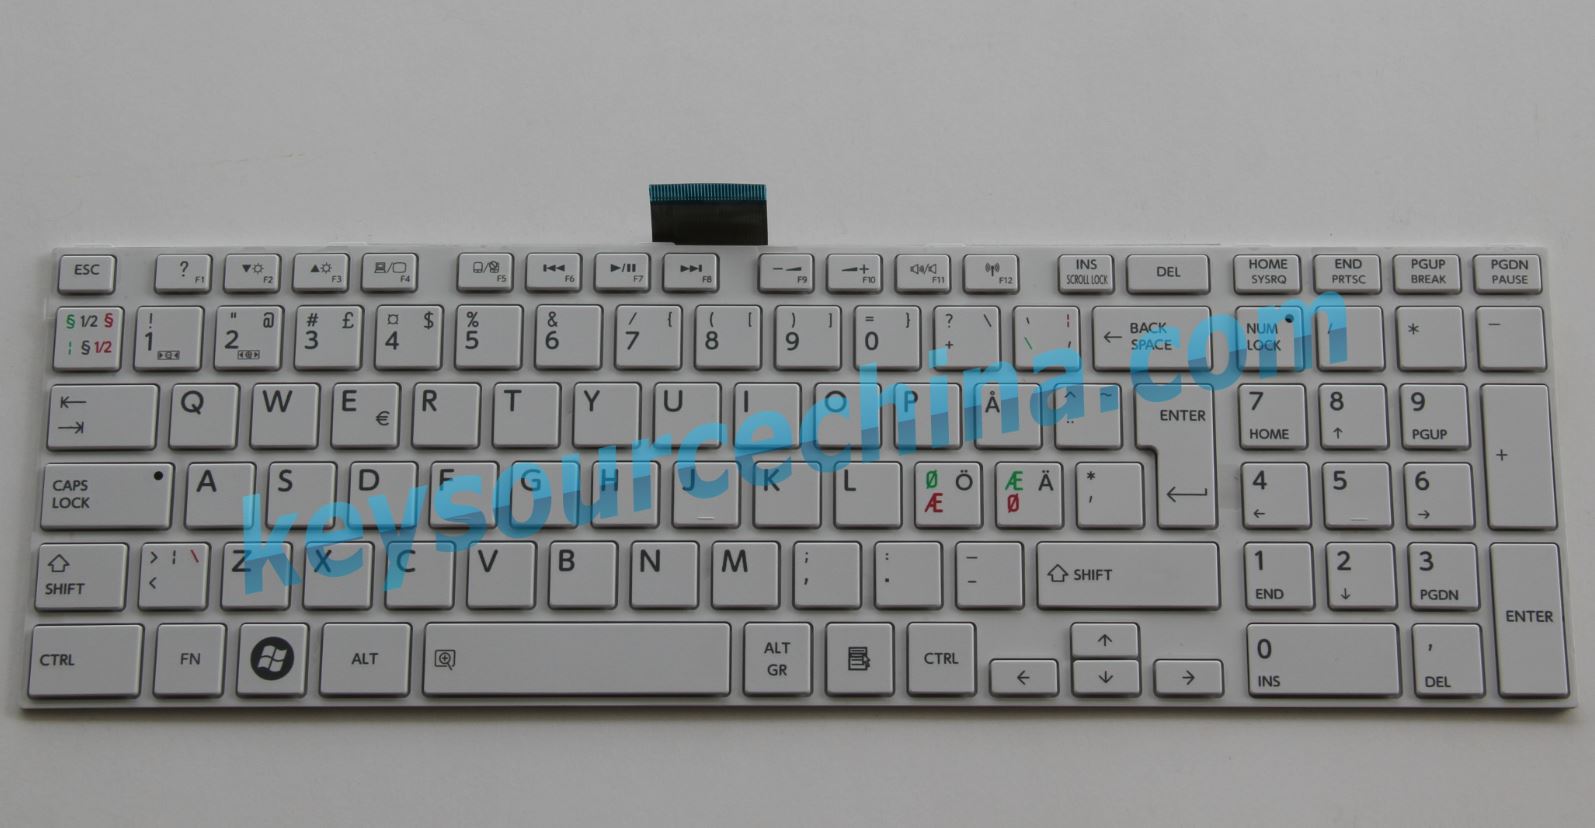 0KN0-ZW3N503 9Z.N7USU.11K Toshiba L855  L850D S850 S855 P850 Nordic keyboard white with frame